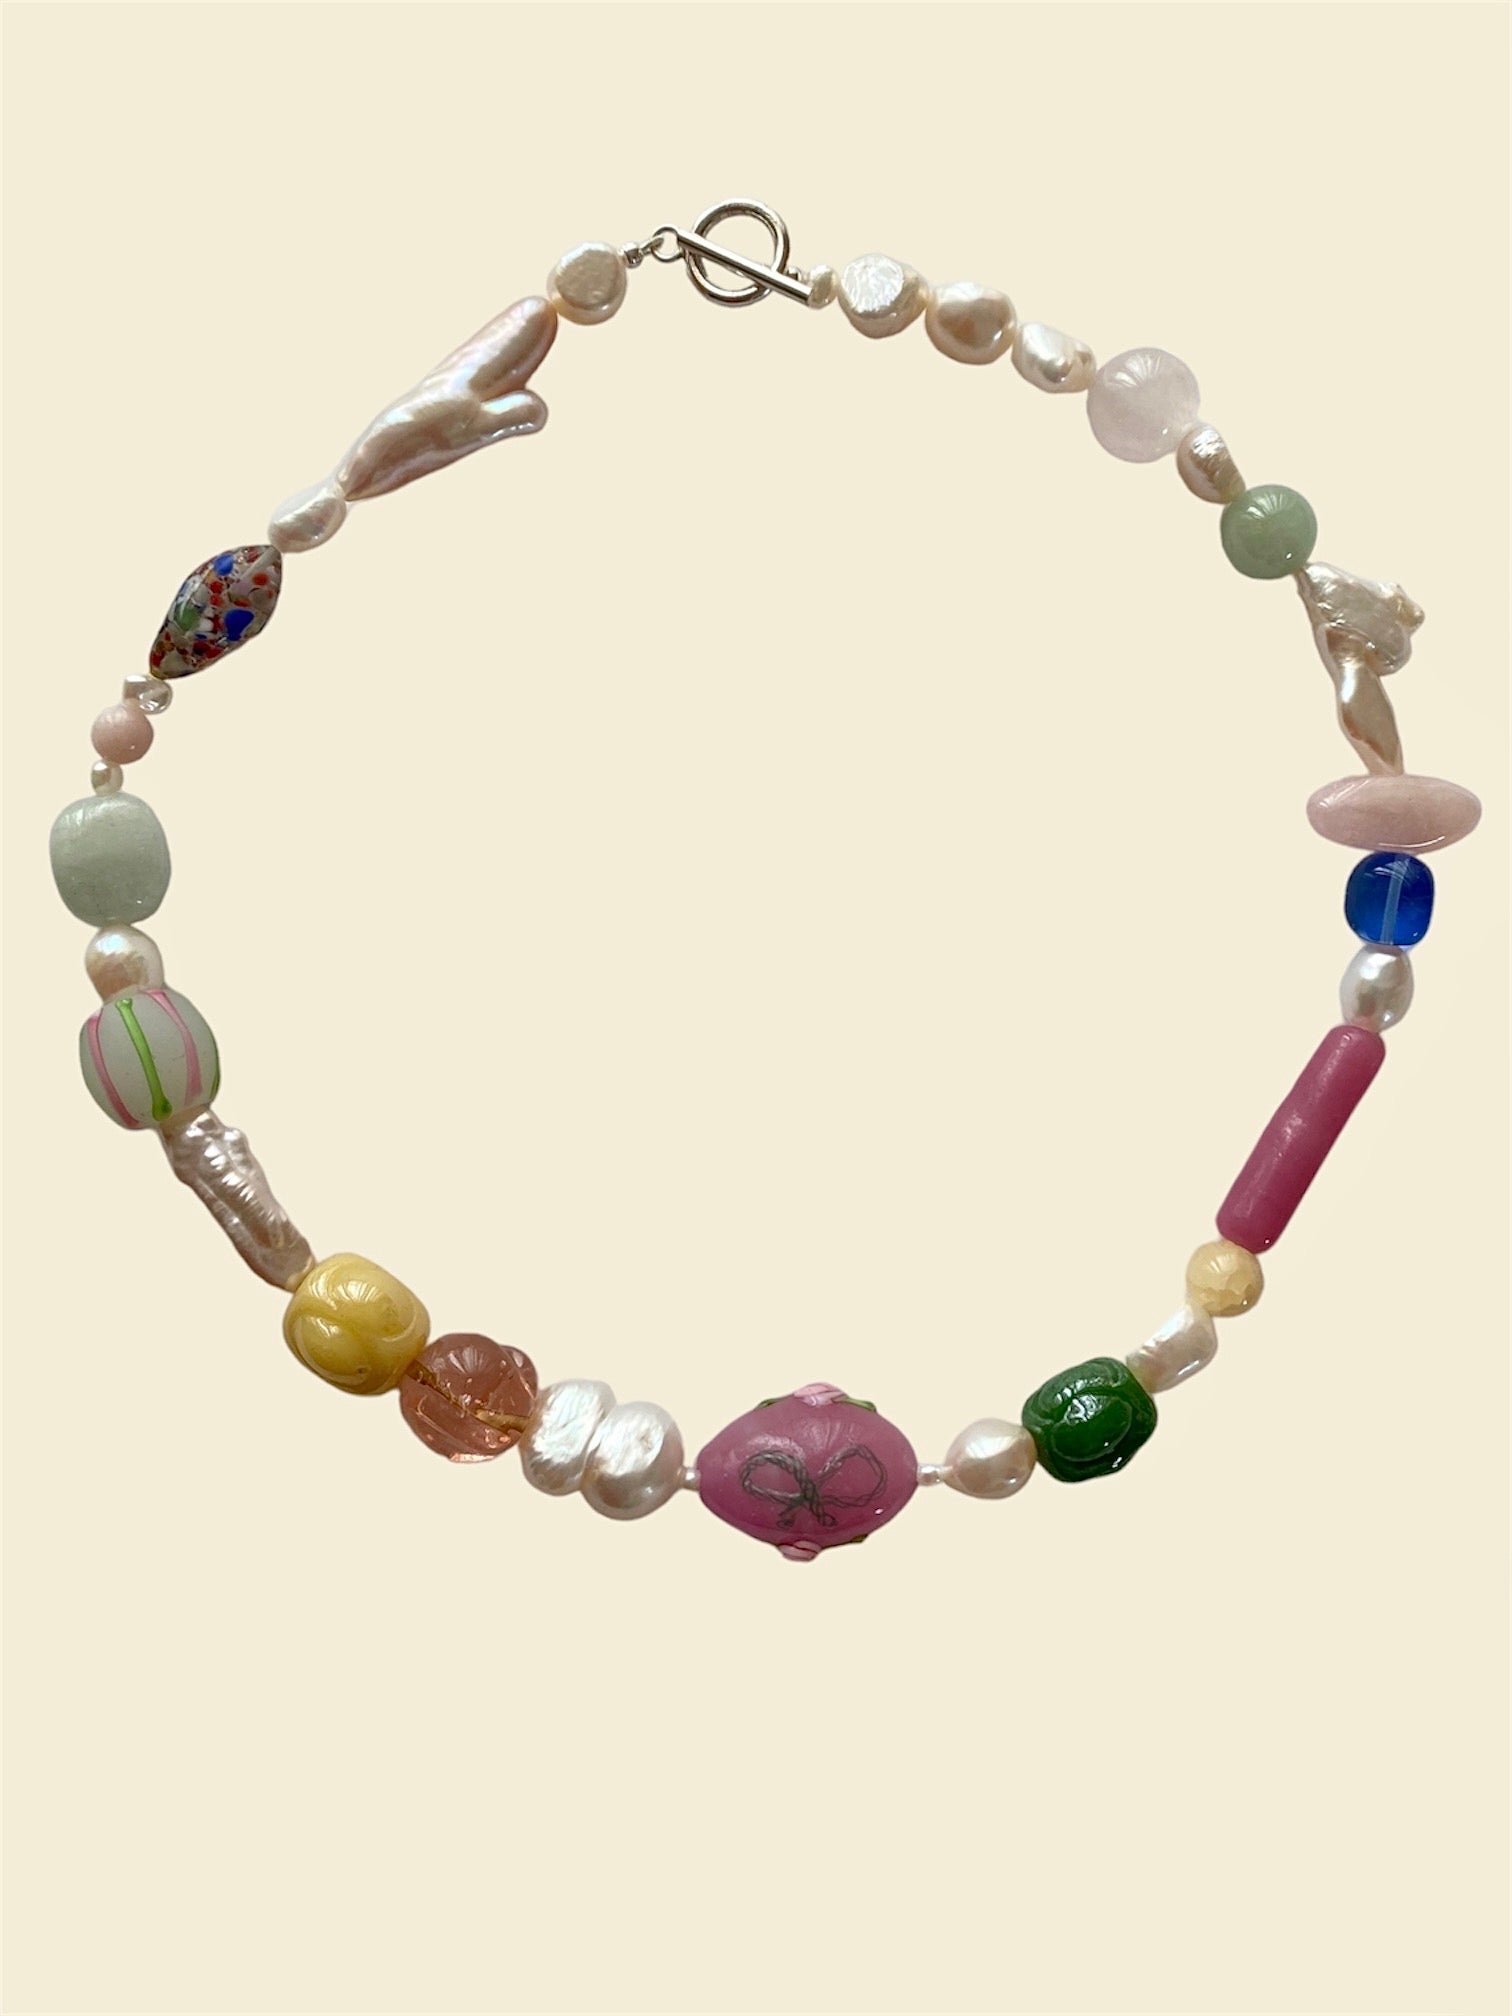 gemstone necklace with jade, opal, onyx, freshwater pearls and deadstock vintage Murano glass beads that is sourced from Italy. Henriette necklace is about the delicate balance between the soft pastel hues and the rich vibrant gemstones, hand-blown glass bead features a gorgeous all around design adorned with roses and pink bows